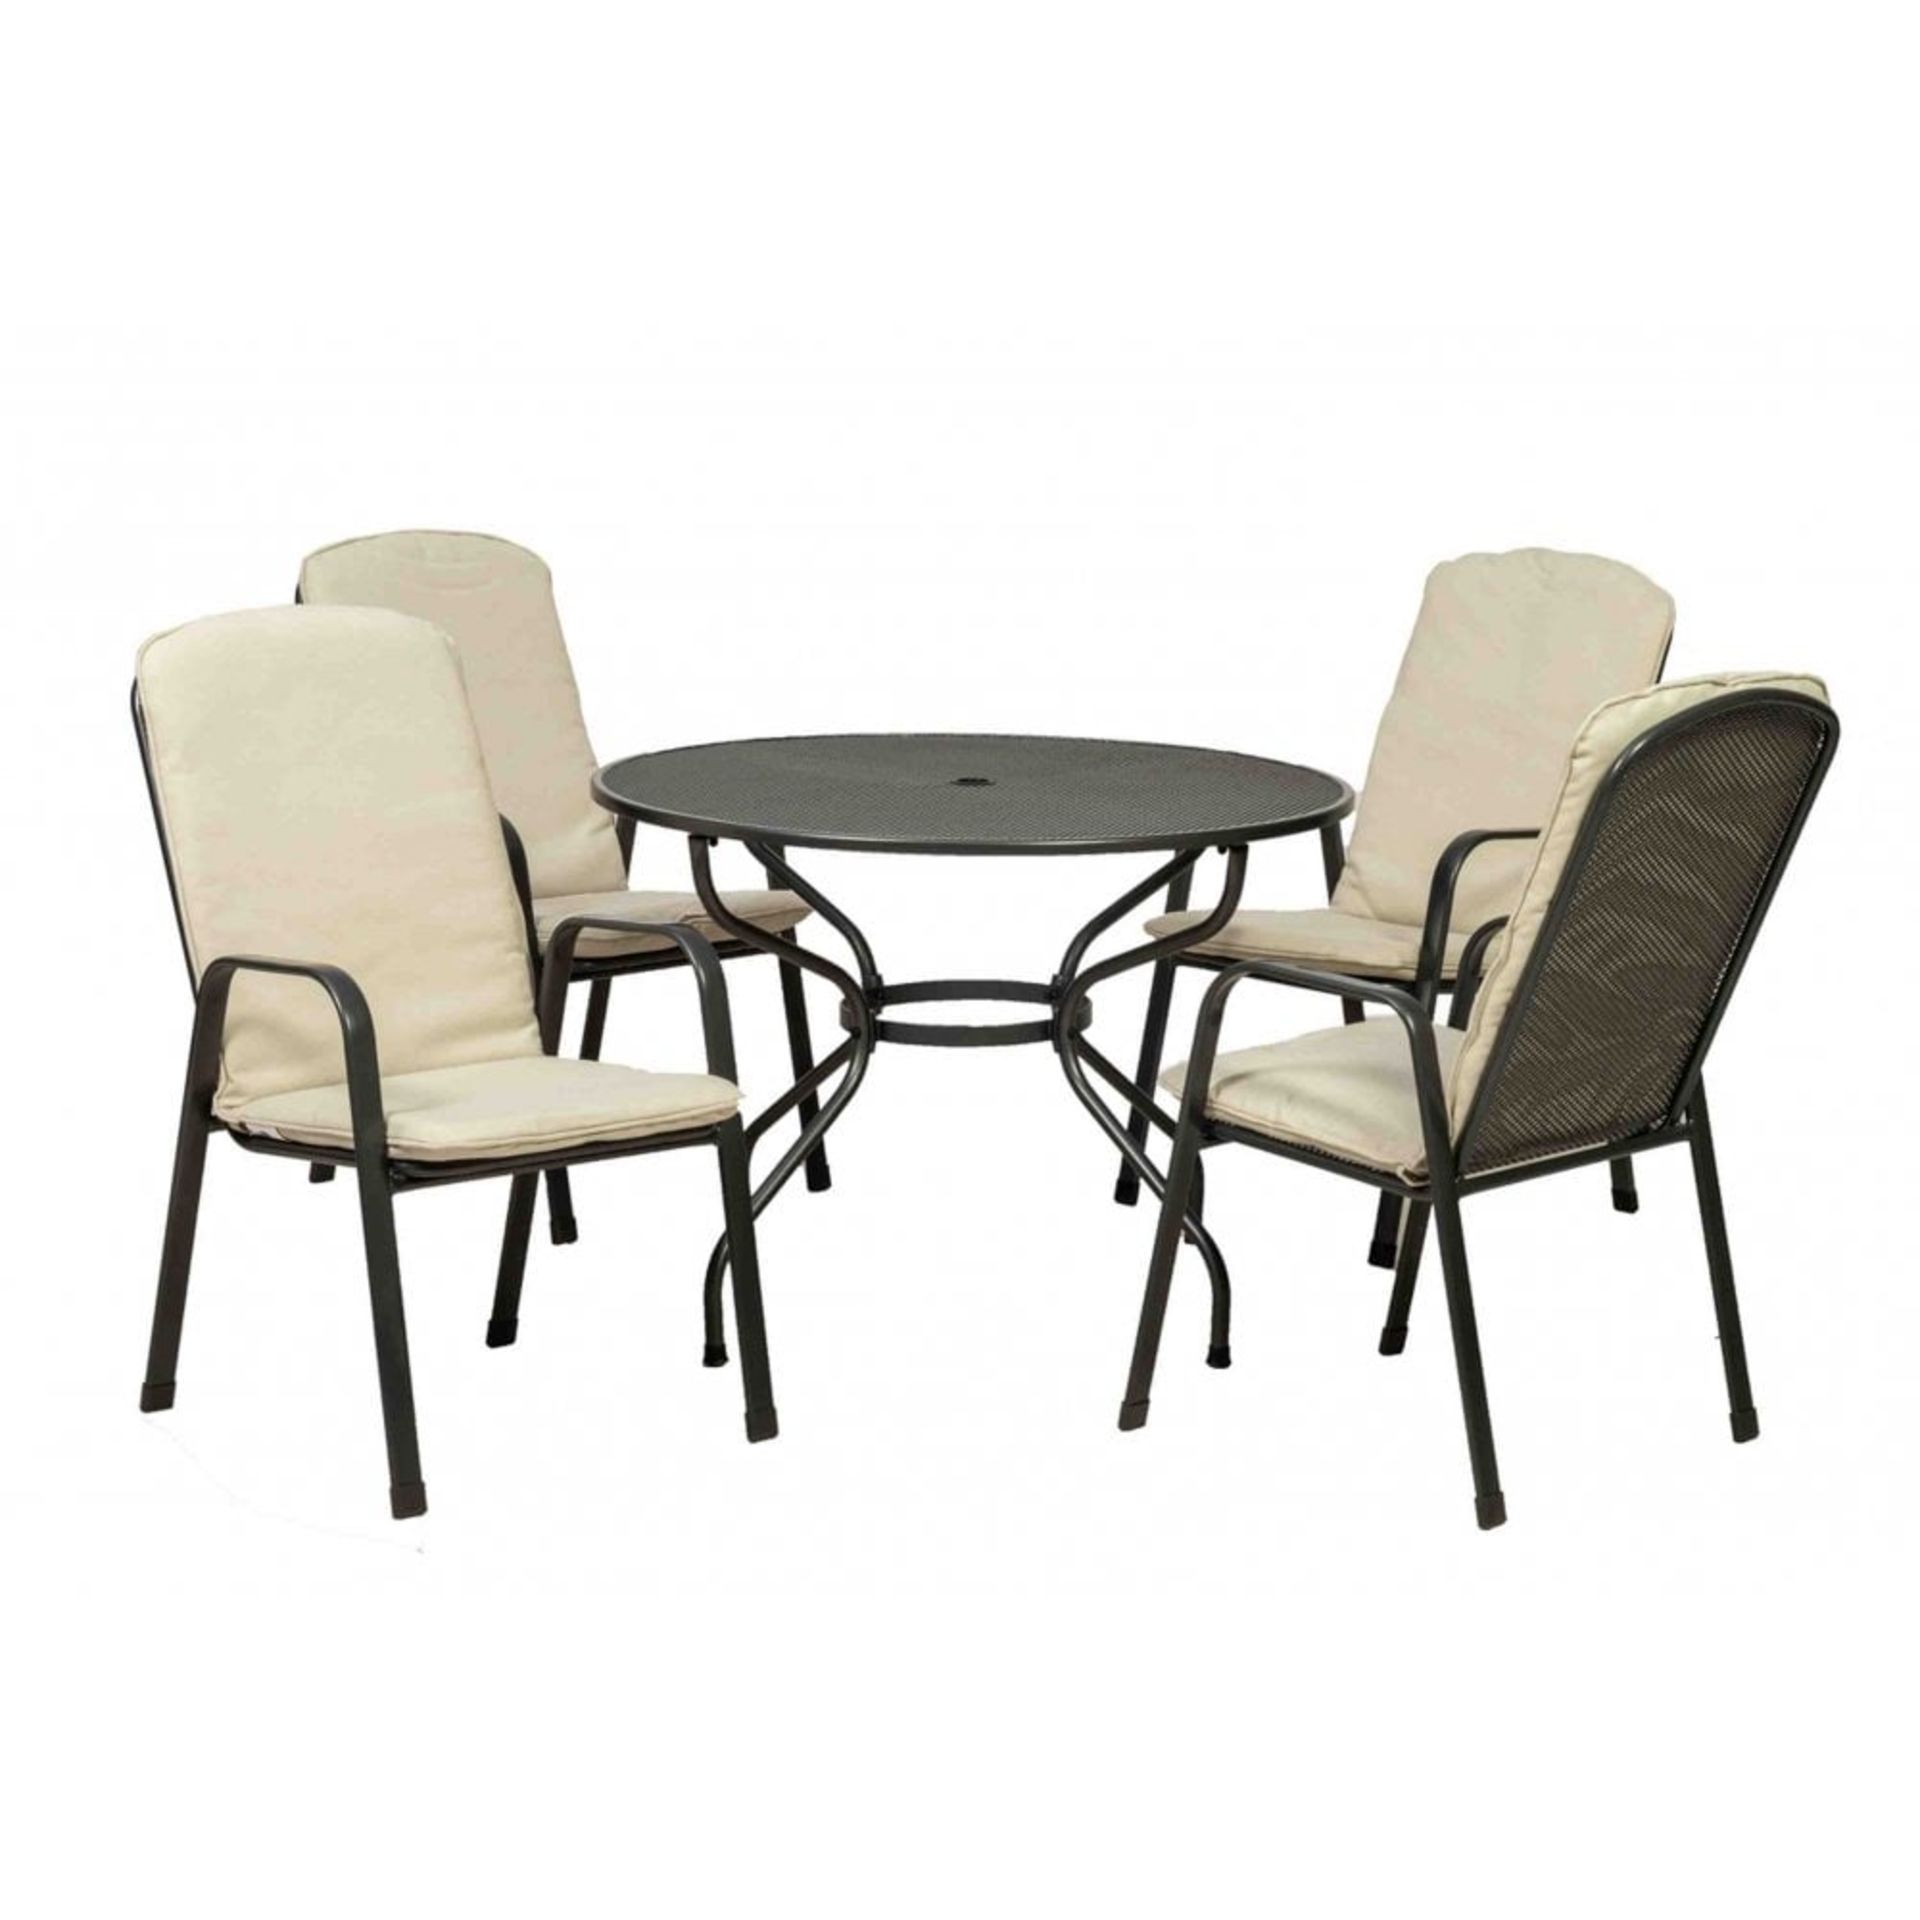 + VAT Brand New Palma 105 Set - Table & Four Chairs (Cushions Not Included) - Highly Durable